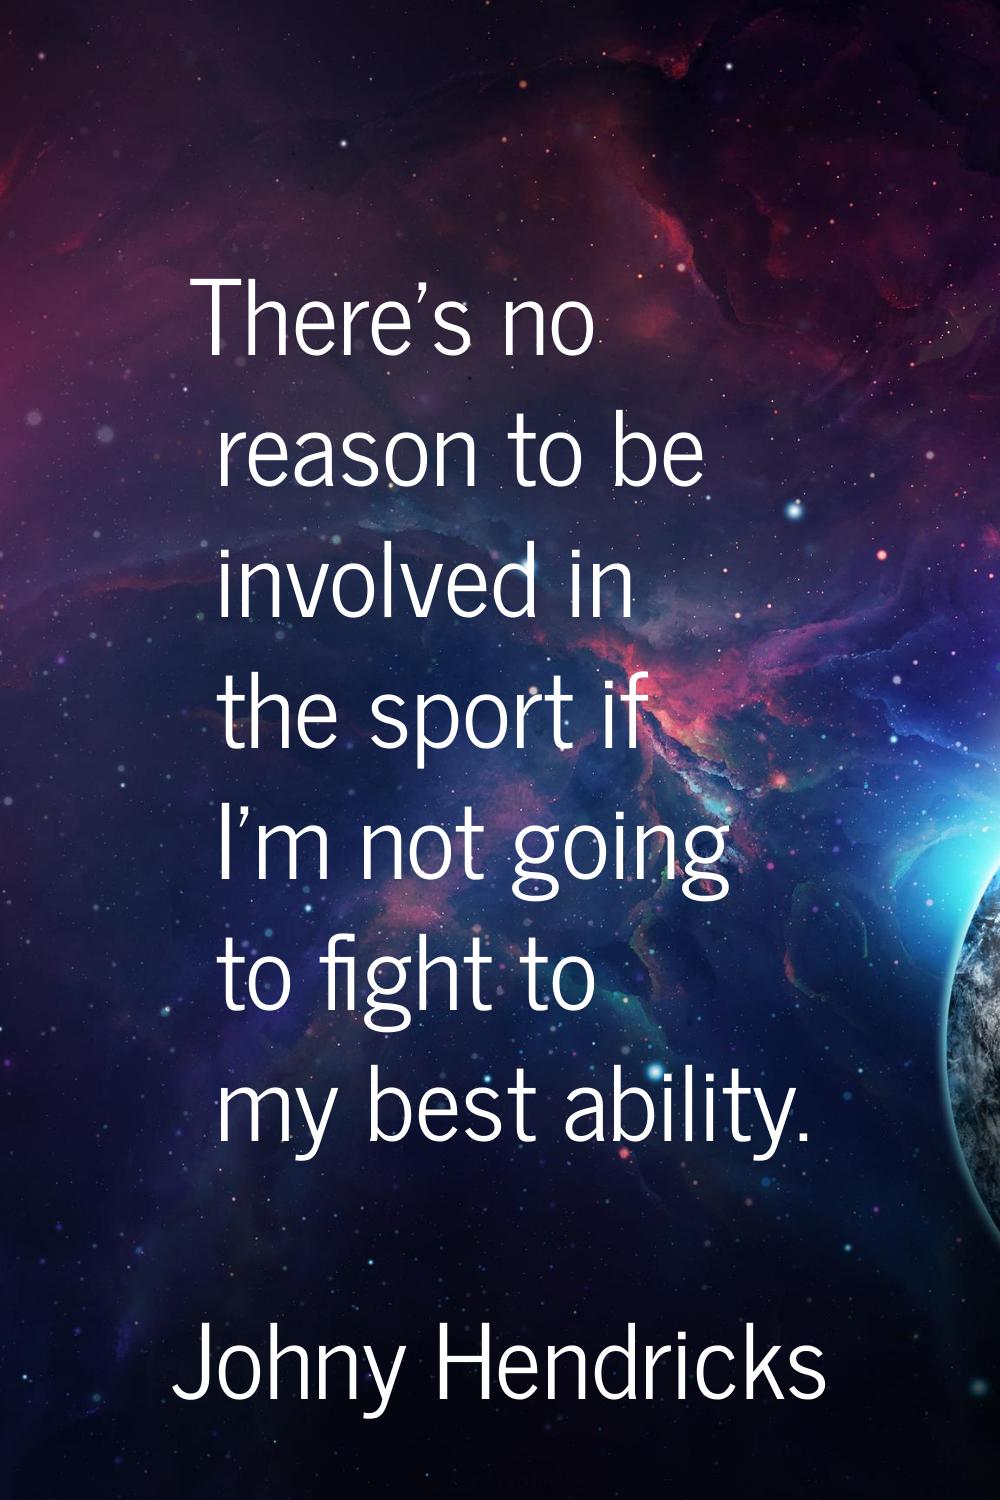 There's no reason to be involved in the sport if I'm not going to fight to my best ability.